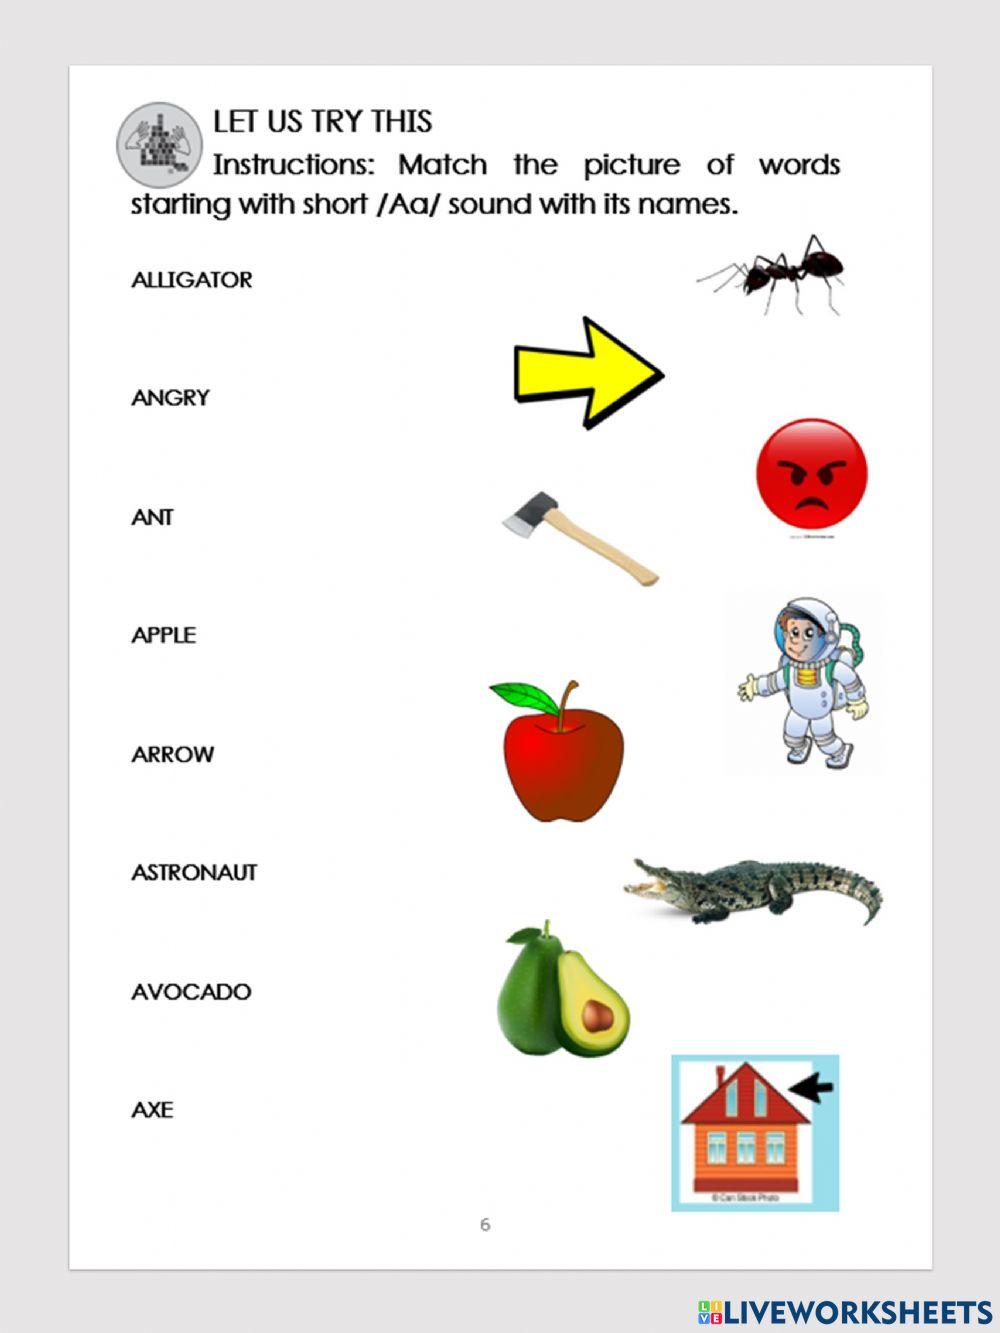 Words starting with short -Aa- sound